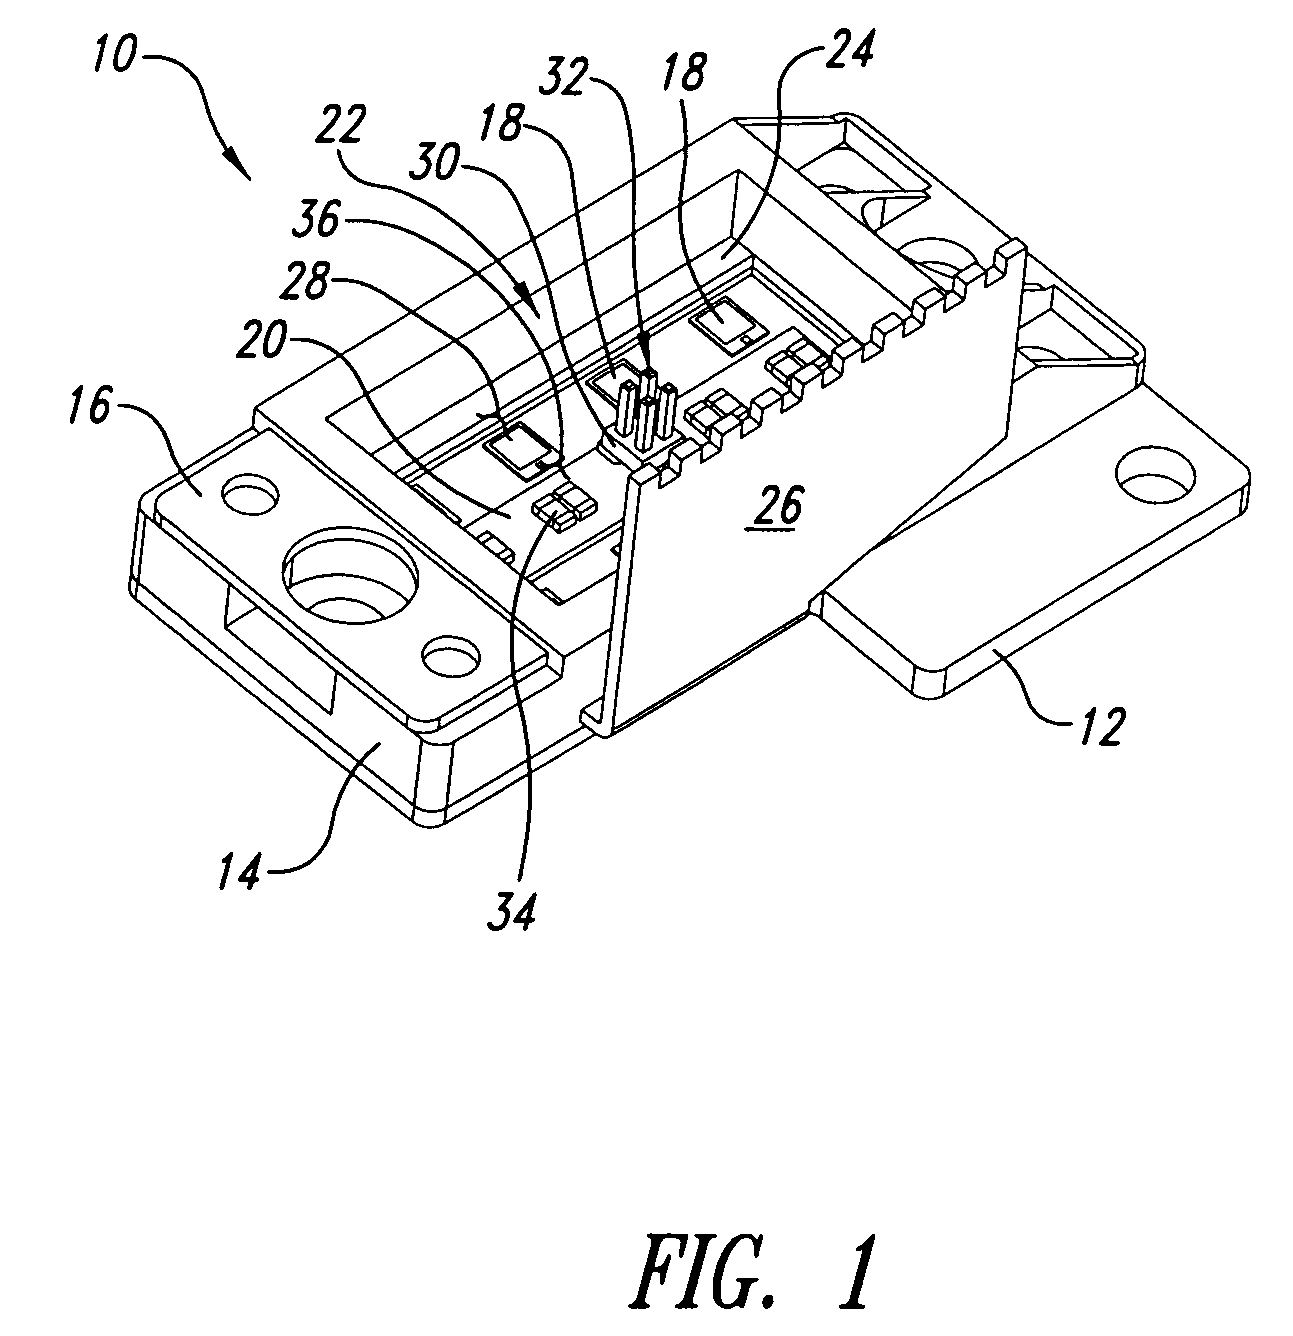 Architecture for power modules such as power inverters